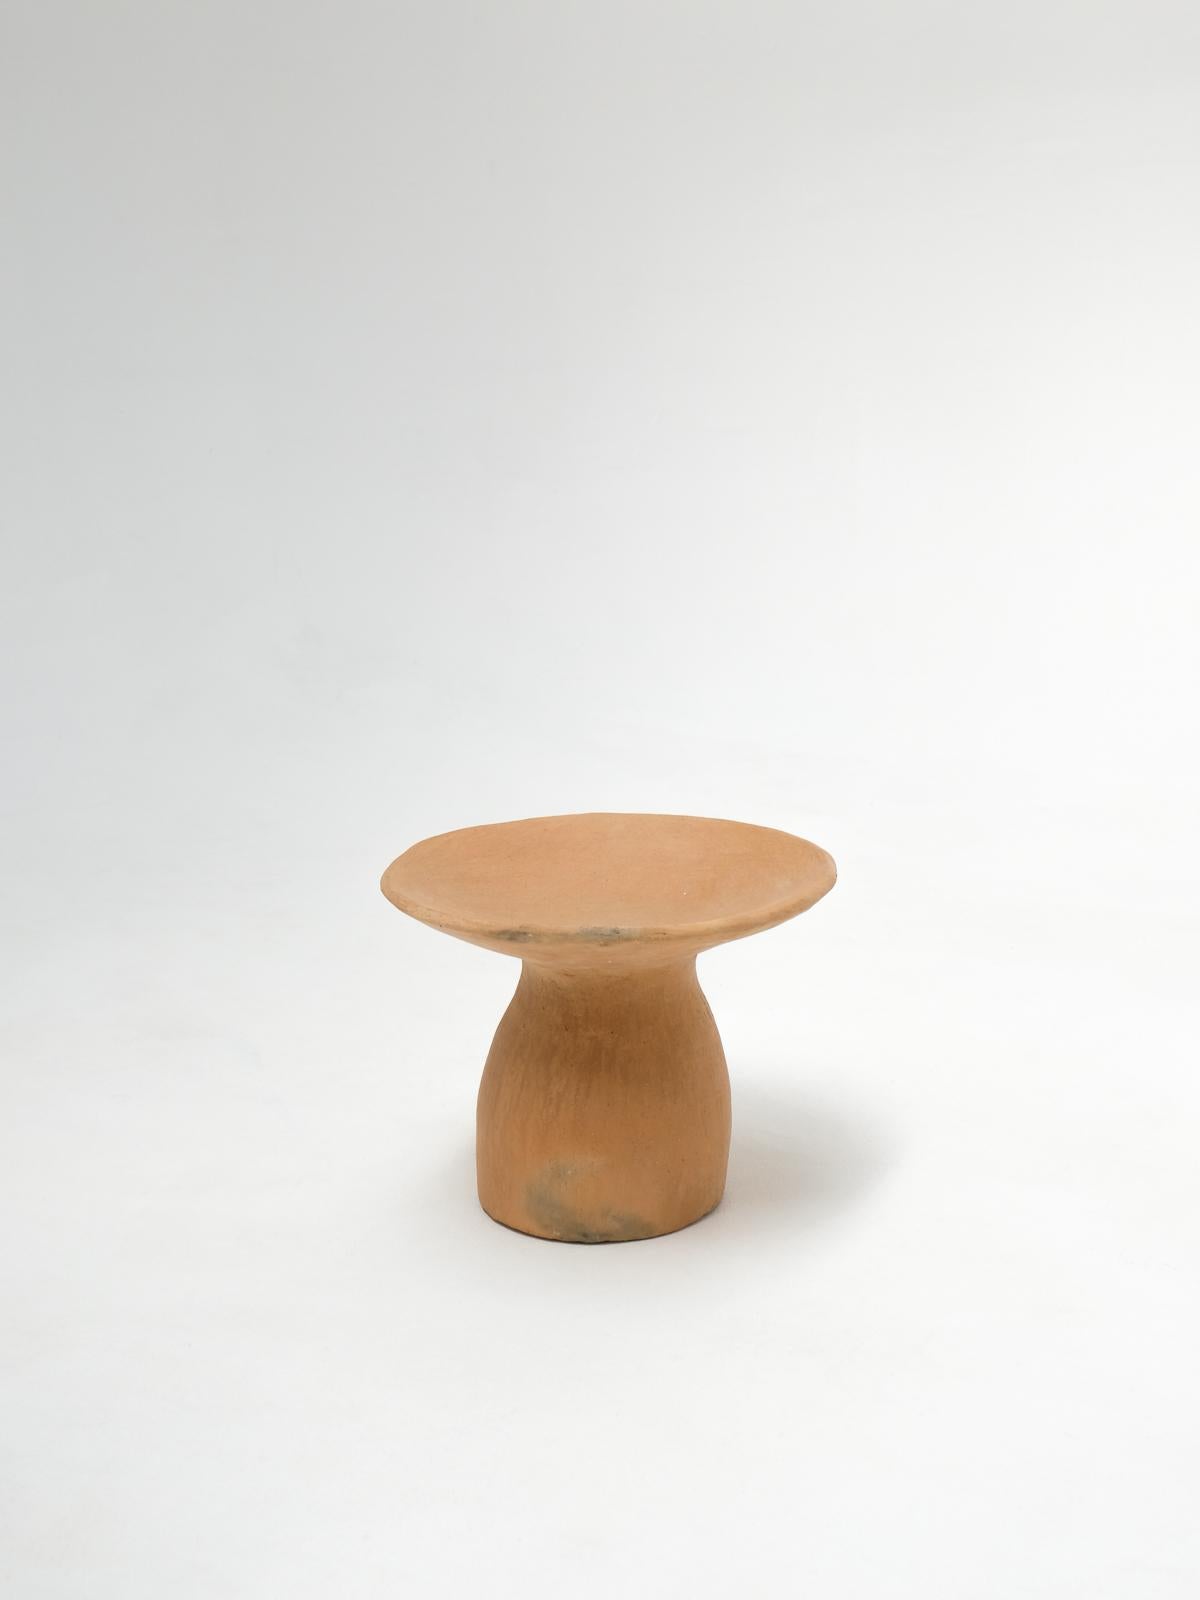 Terracotta contemporary Side Tables Made of local Clay, Handbuilt handfired For Sale 8